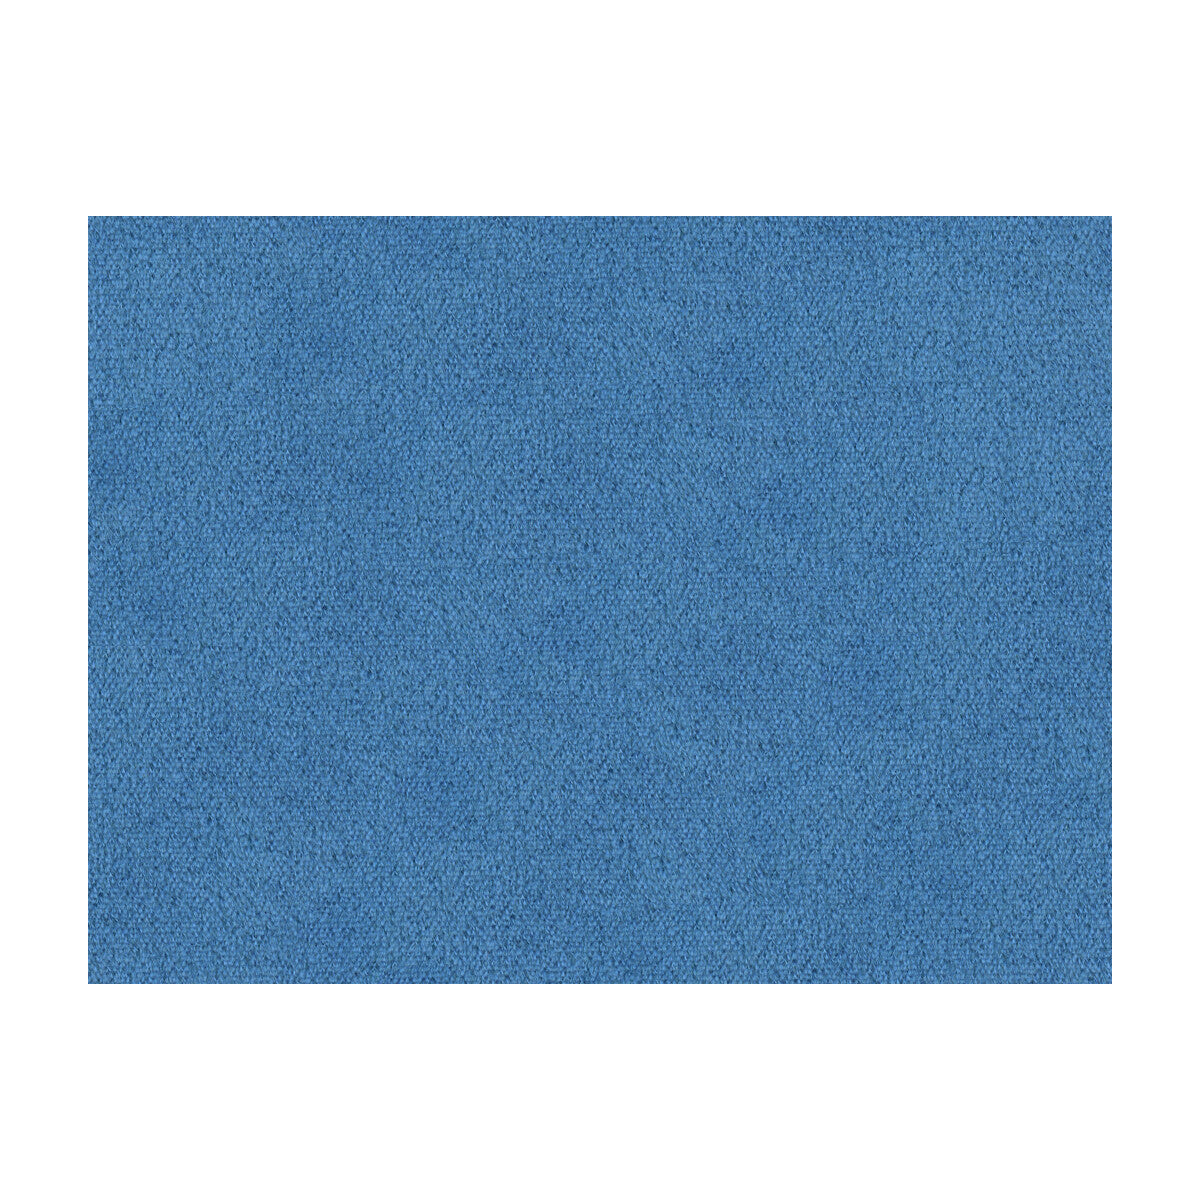 Autun Mohair Velvet fabric in blue color - pattern BR-89778.222.0 - by Brunschwig &amp; Fils